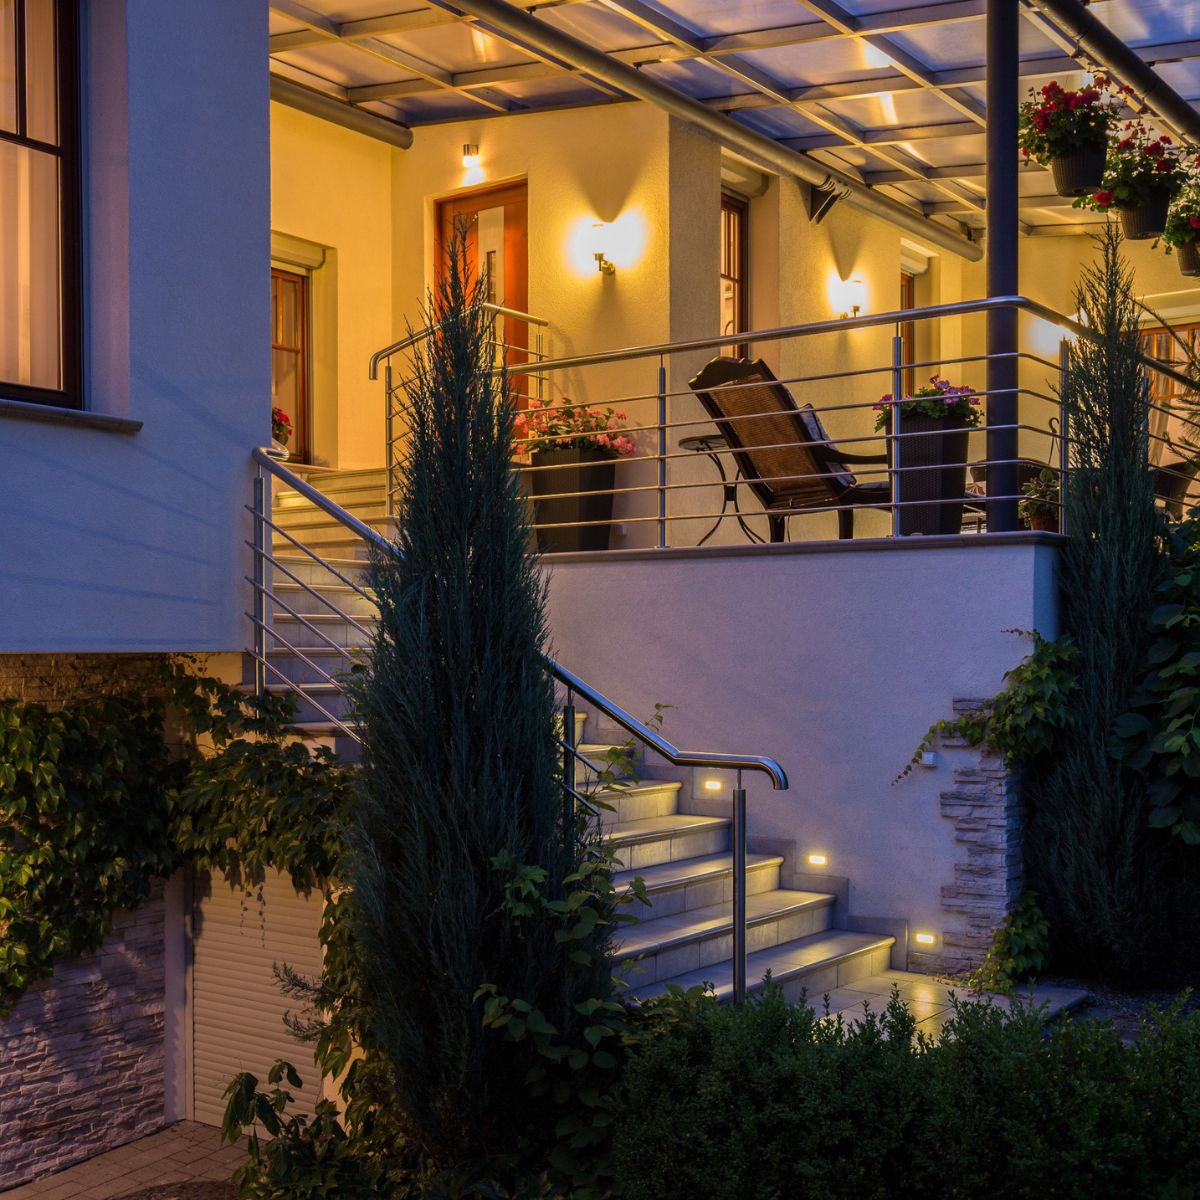 a brightly lit exterior of a home in the evening with lights installed outside windows, doors, and on stairs